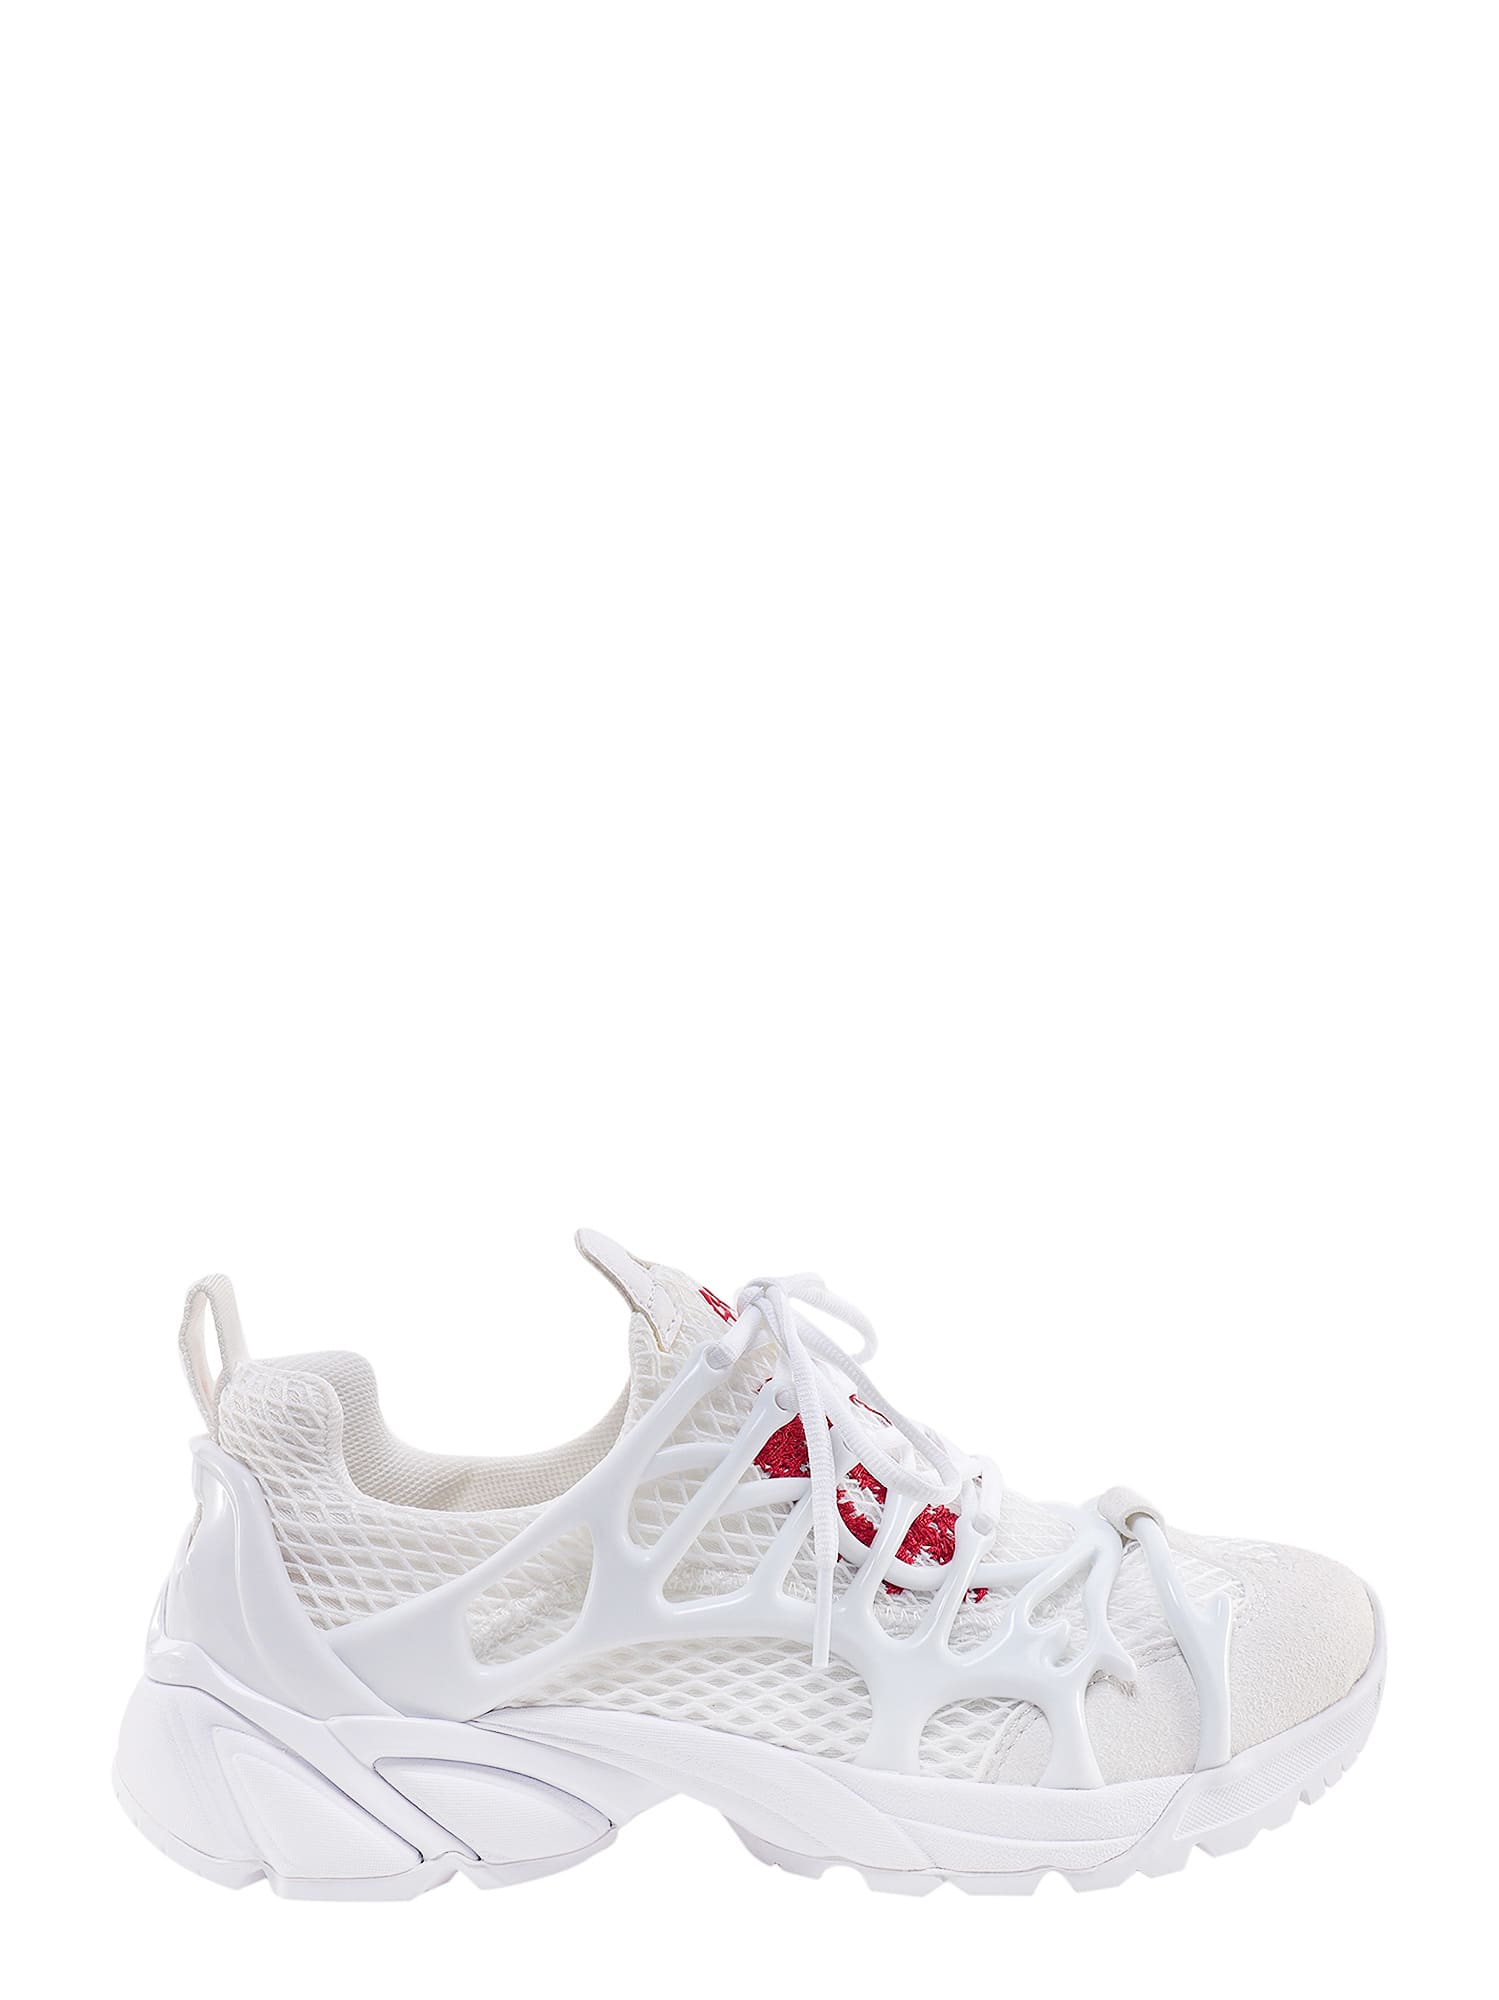 44 Label Group Symbiont Sneakers In White